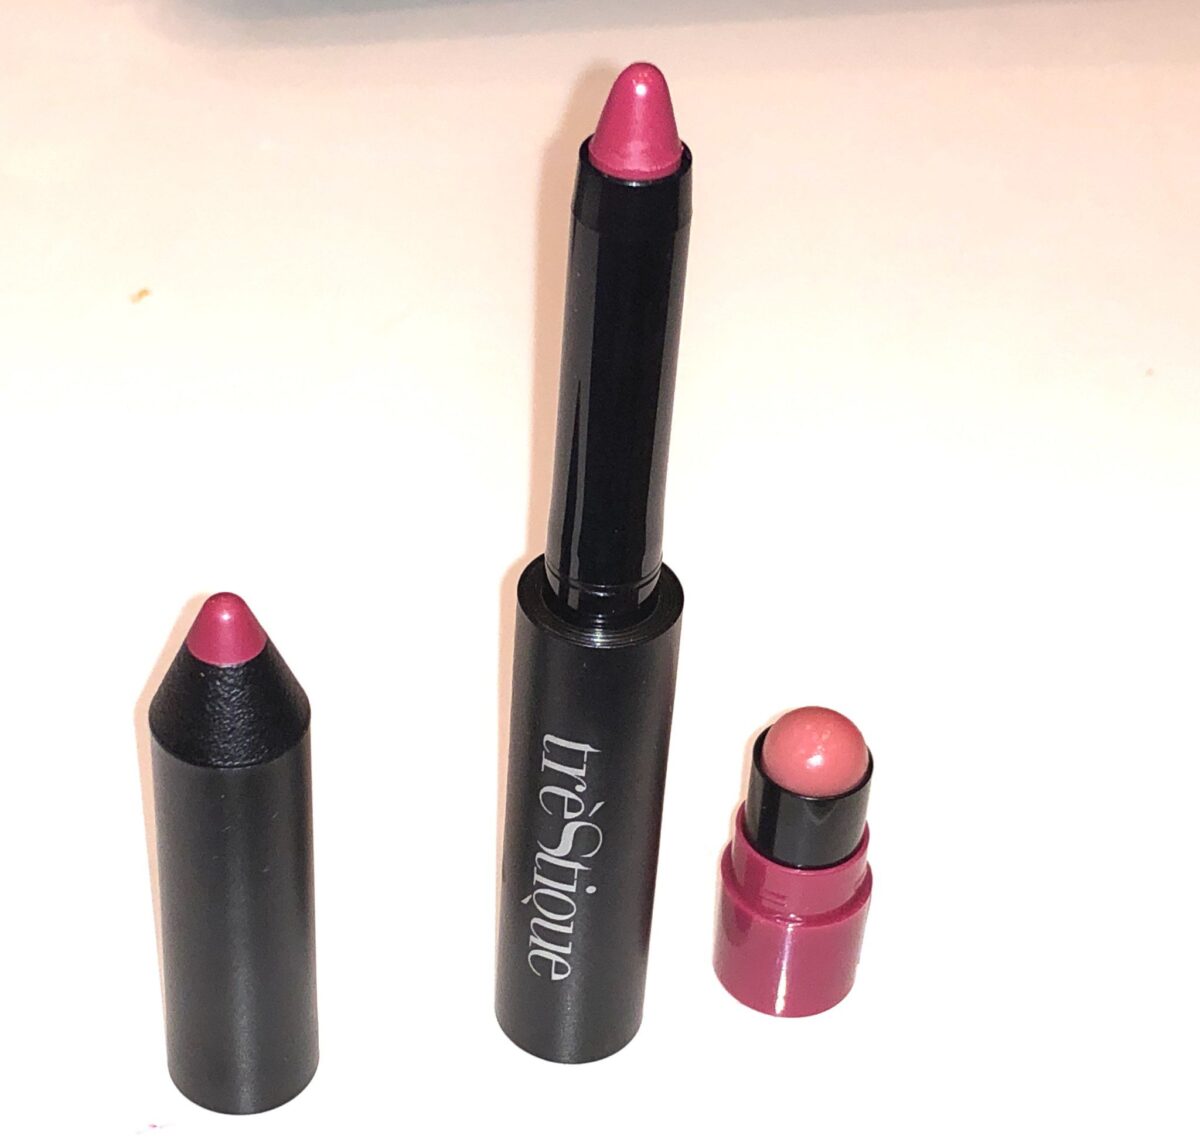 THE LIP CRAYON WITH LID AND LIP BALM